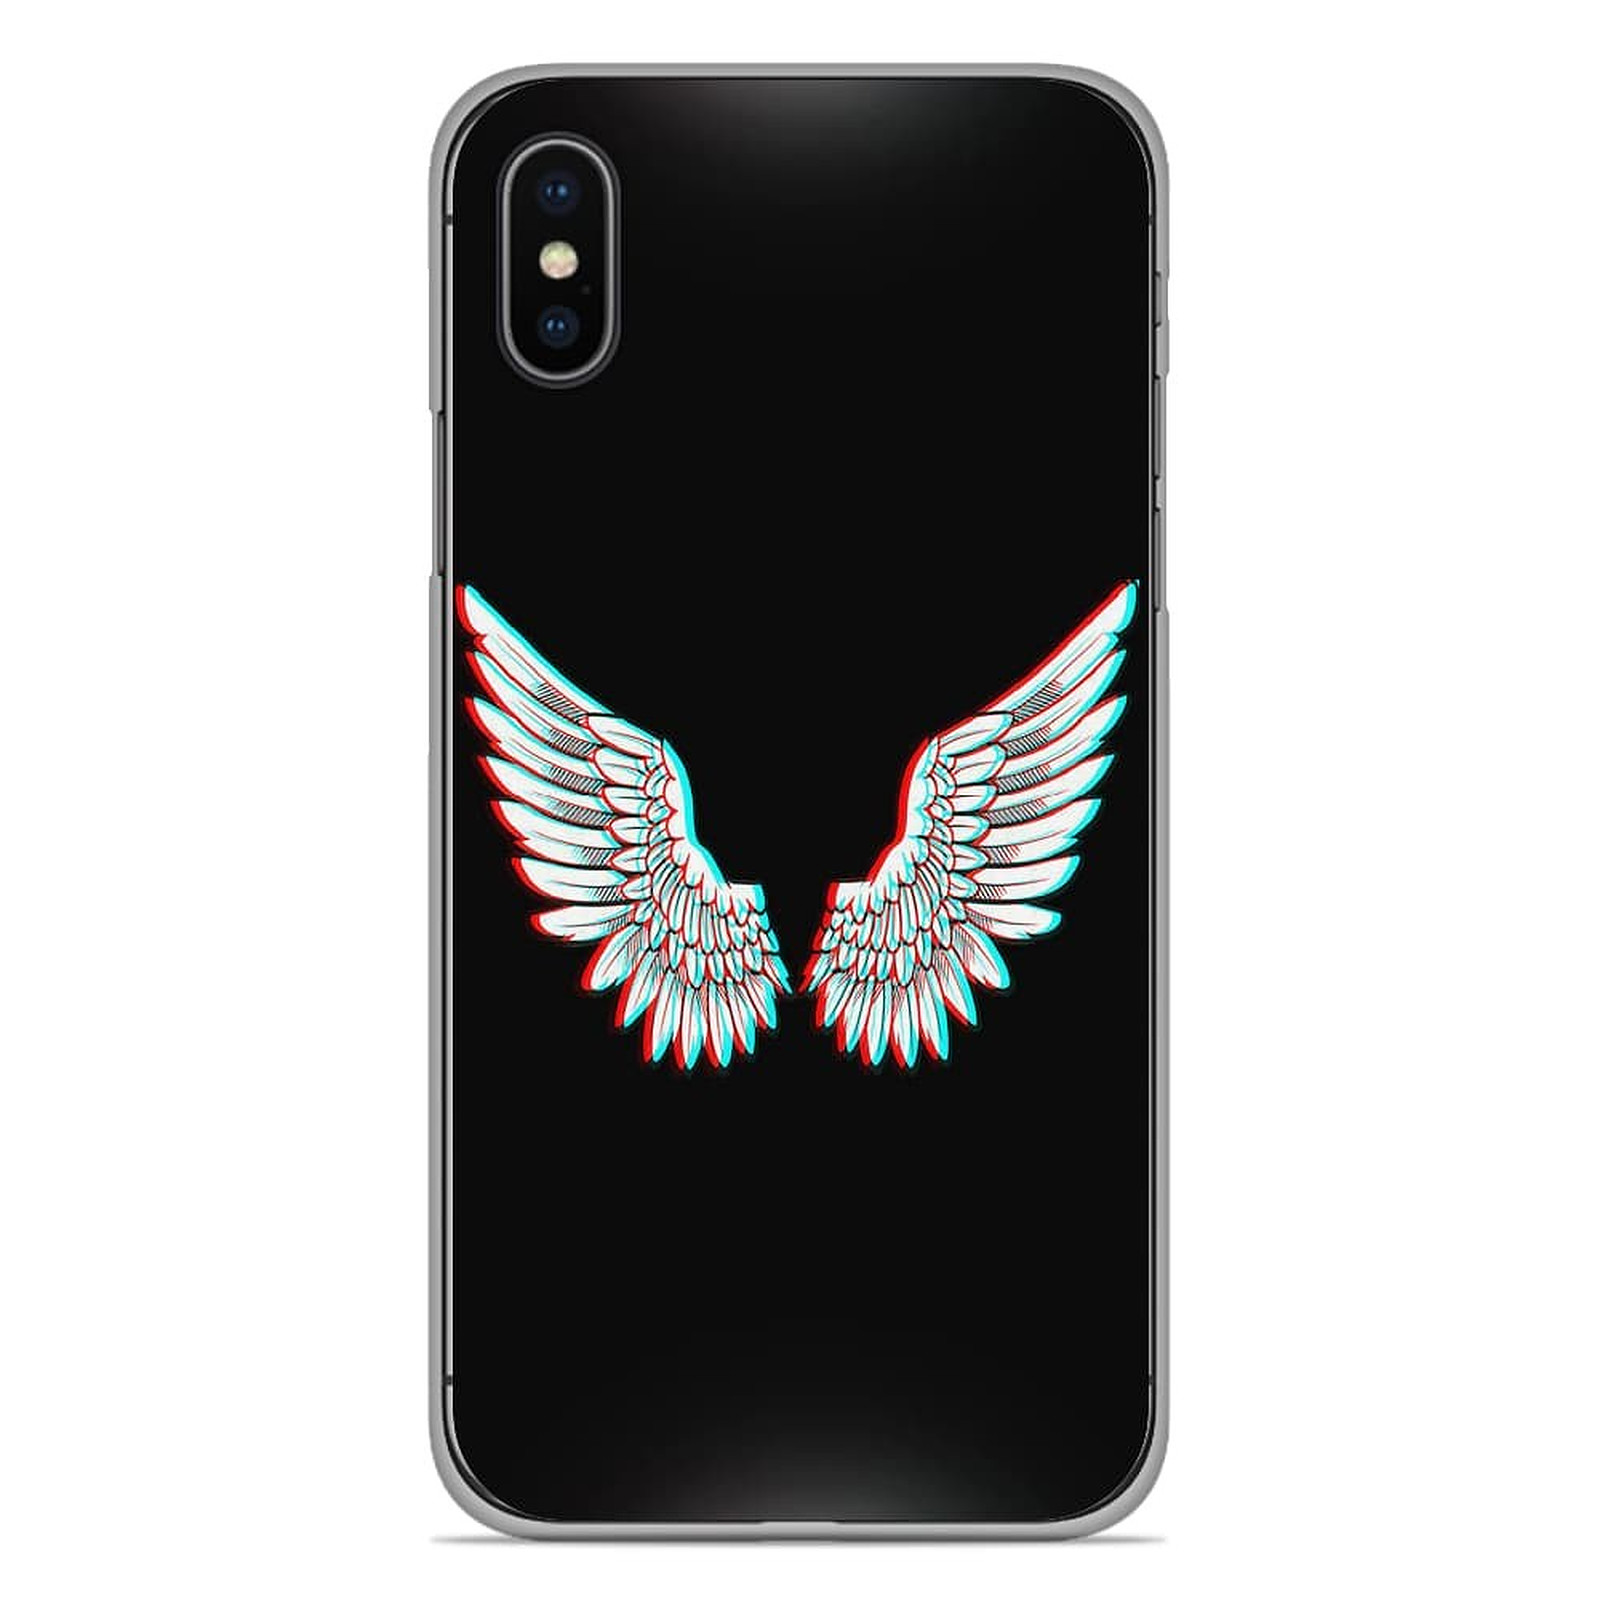 1001 Coques Coque silicone gel Apple iPhone XS Max motif Ailes d'Ange - Coque telephone 1001Coques